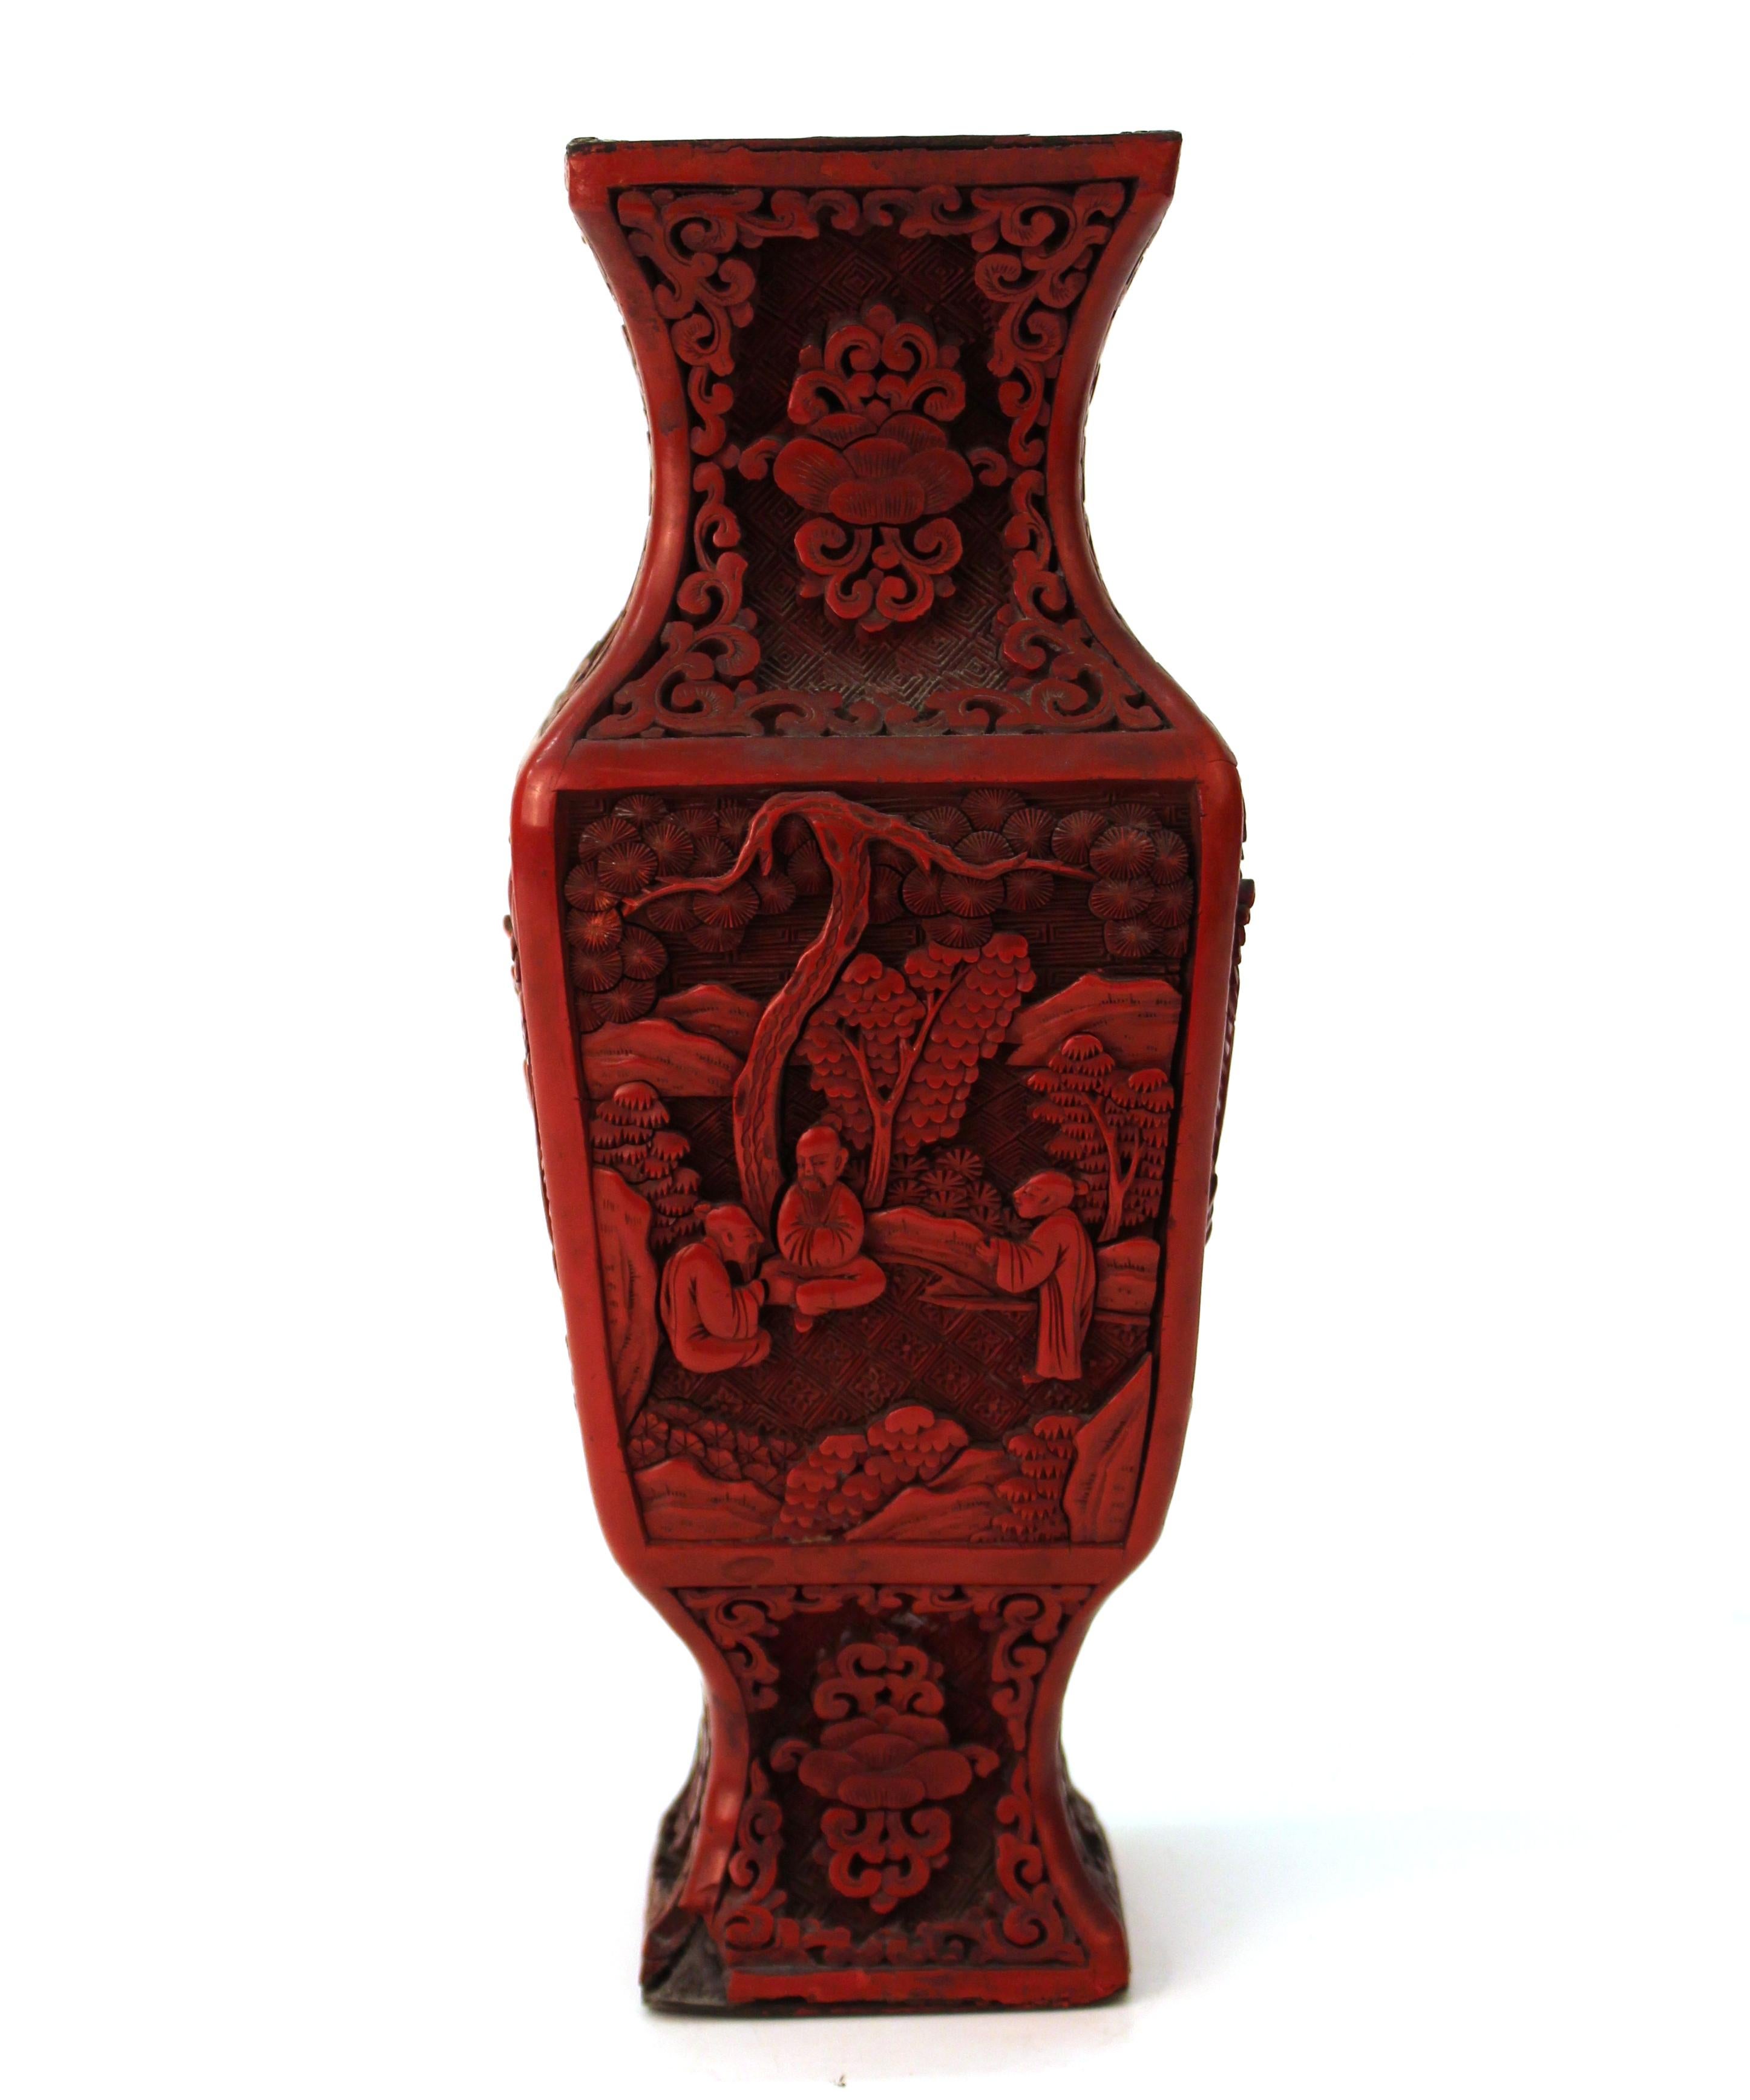 Chinese Cinnabar lacquer vase with carved depictions of sages in classical landscapes and stylized flora and foliage. The piece has a black interior. Some losses to black lacquer on rim of mouth.